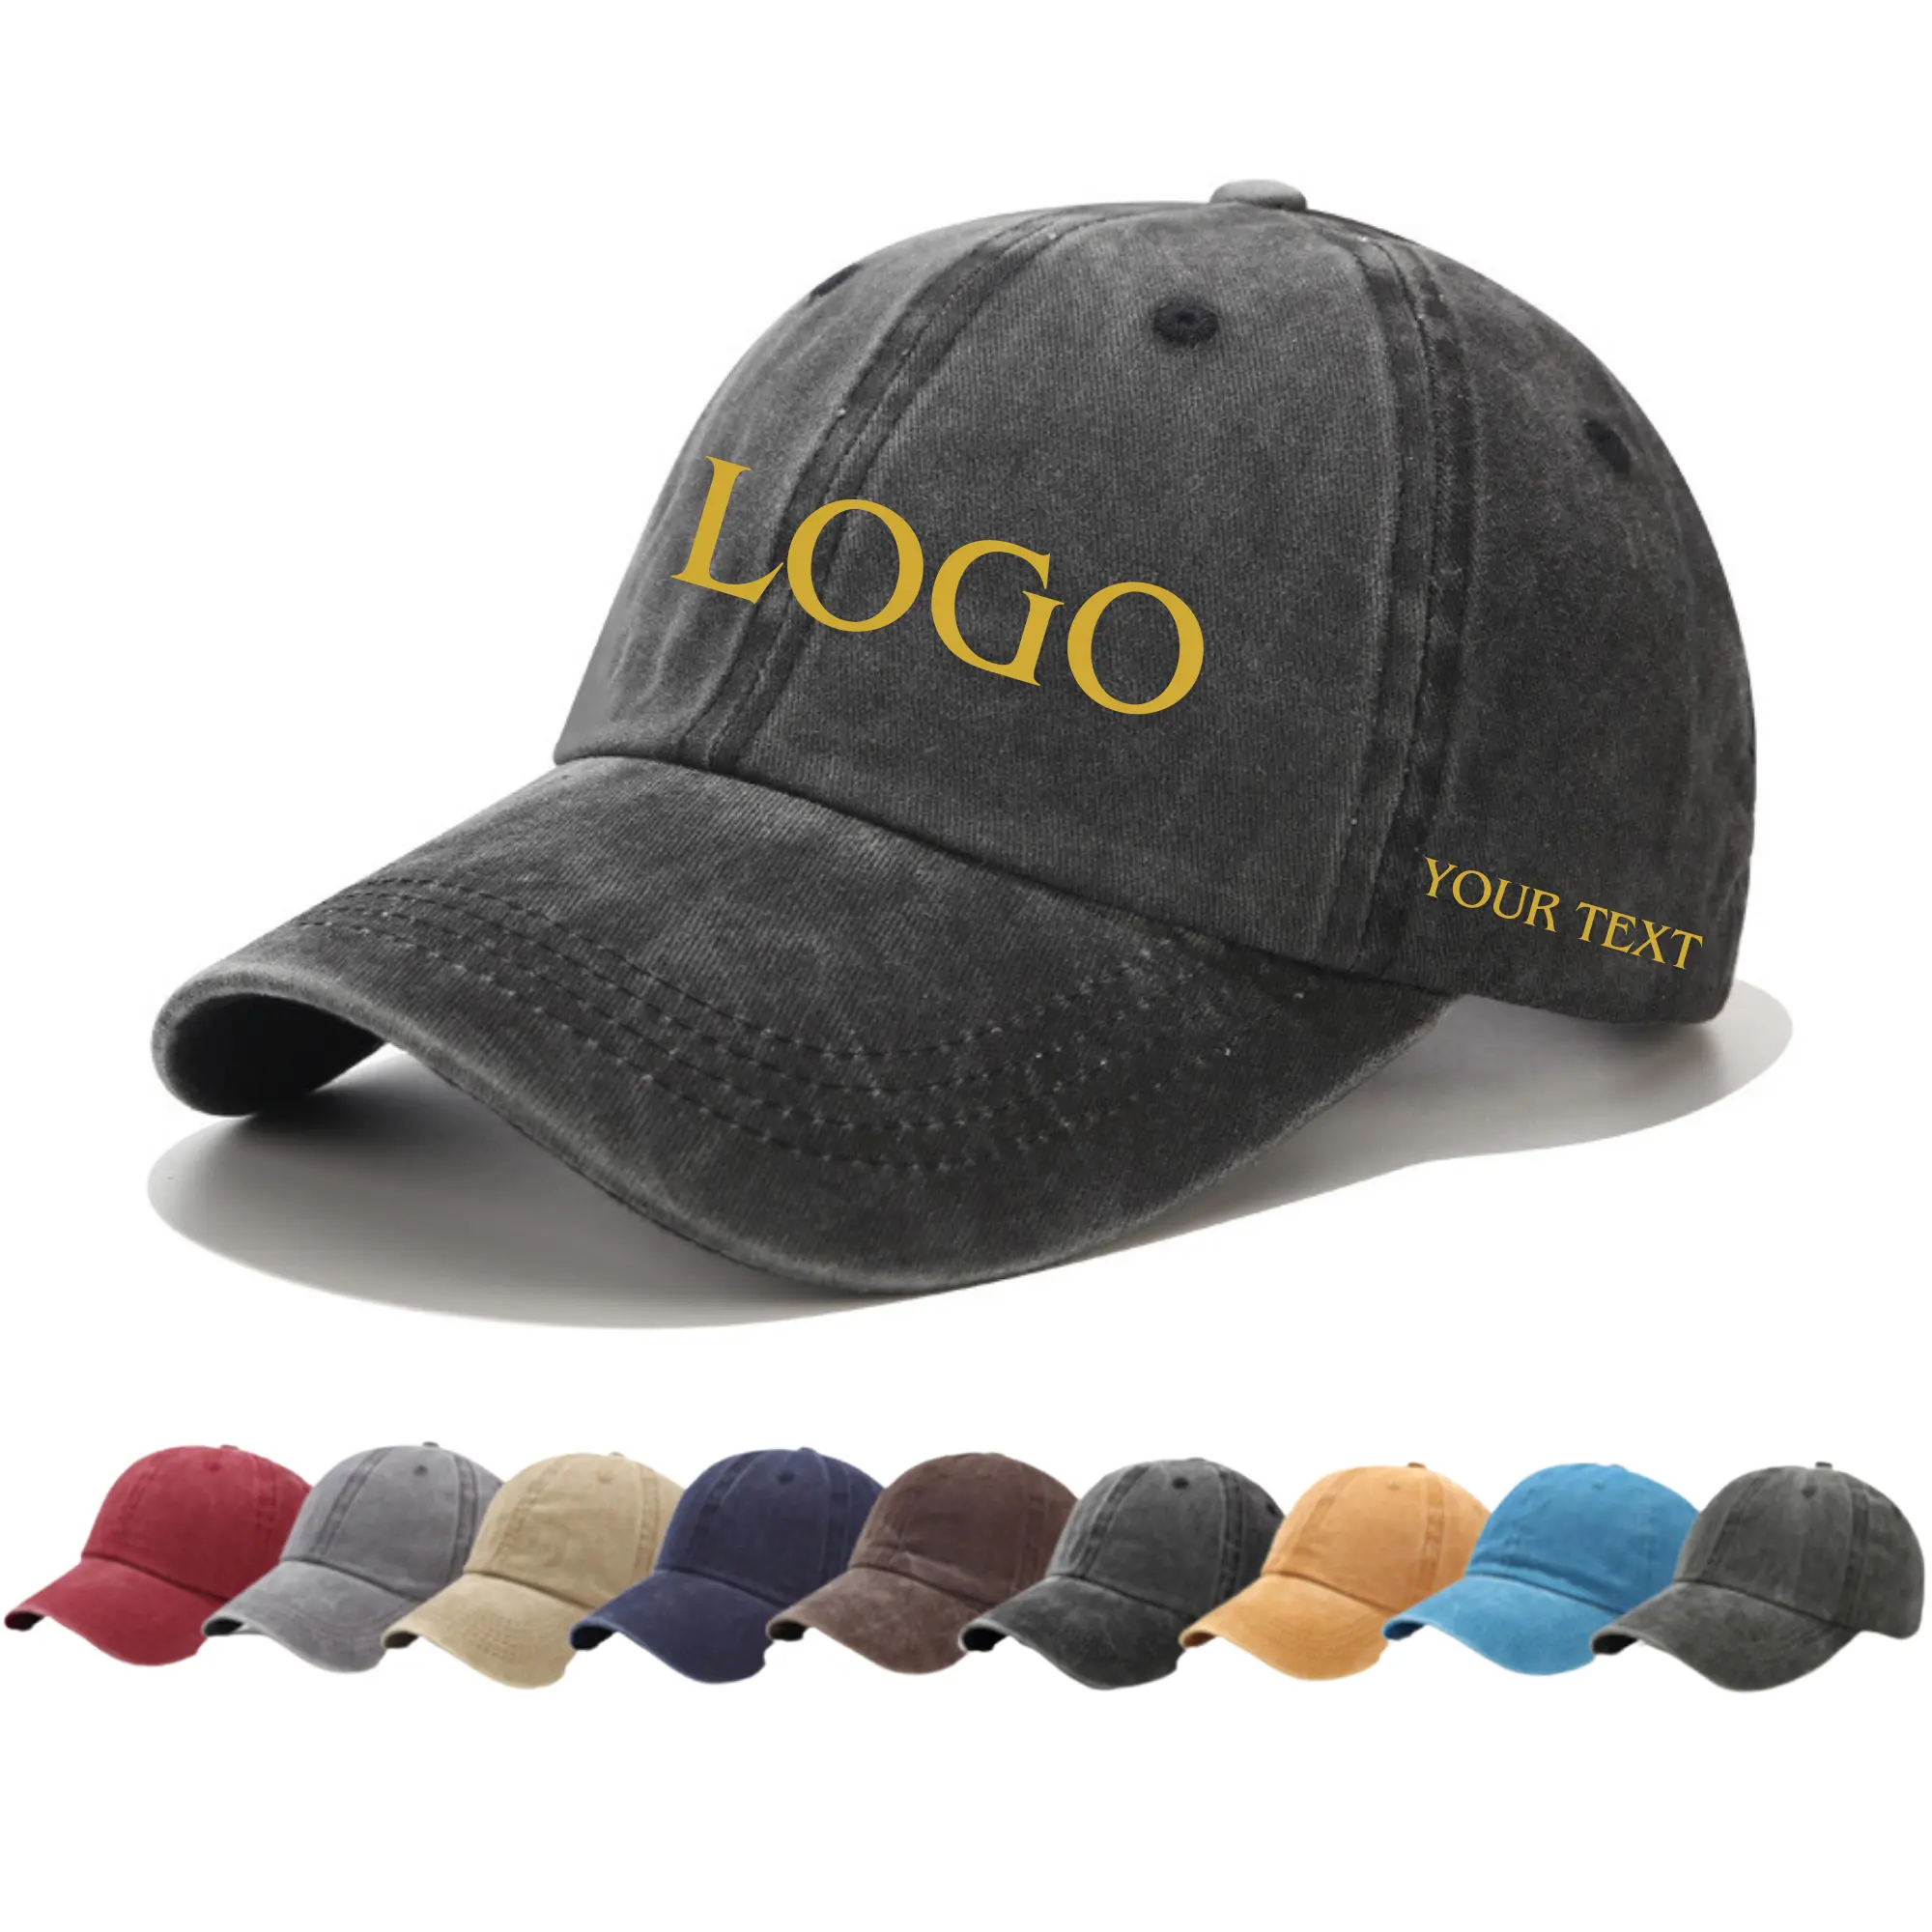 Wholesale Custom Cotton Baseball Caps Customize Sports Hats And Caps Embroidery Logo Cap for Man